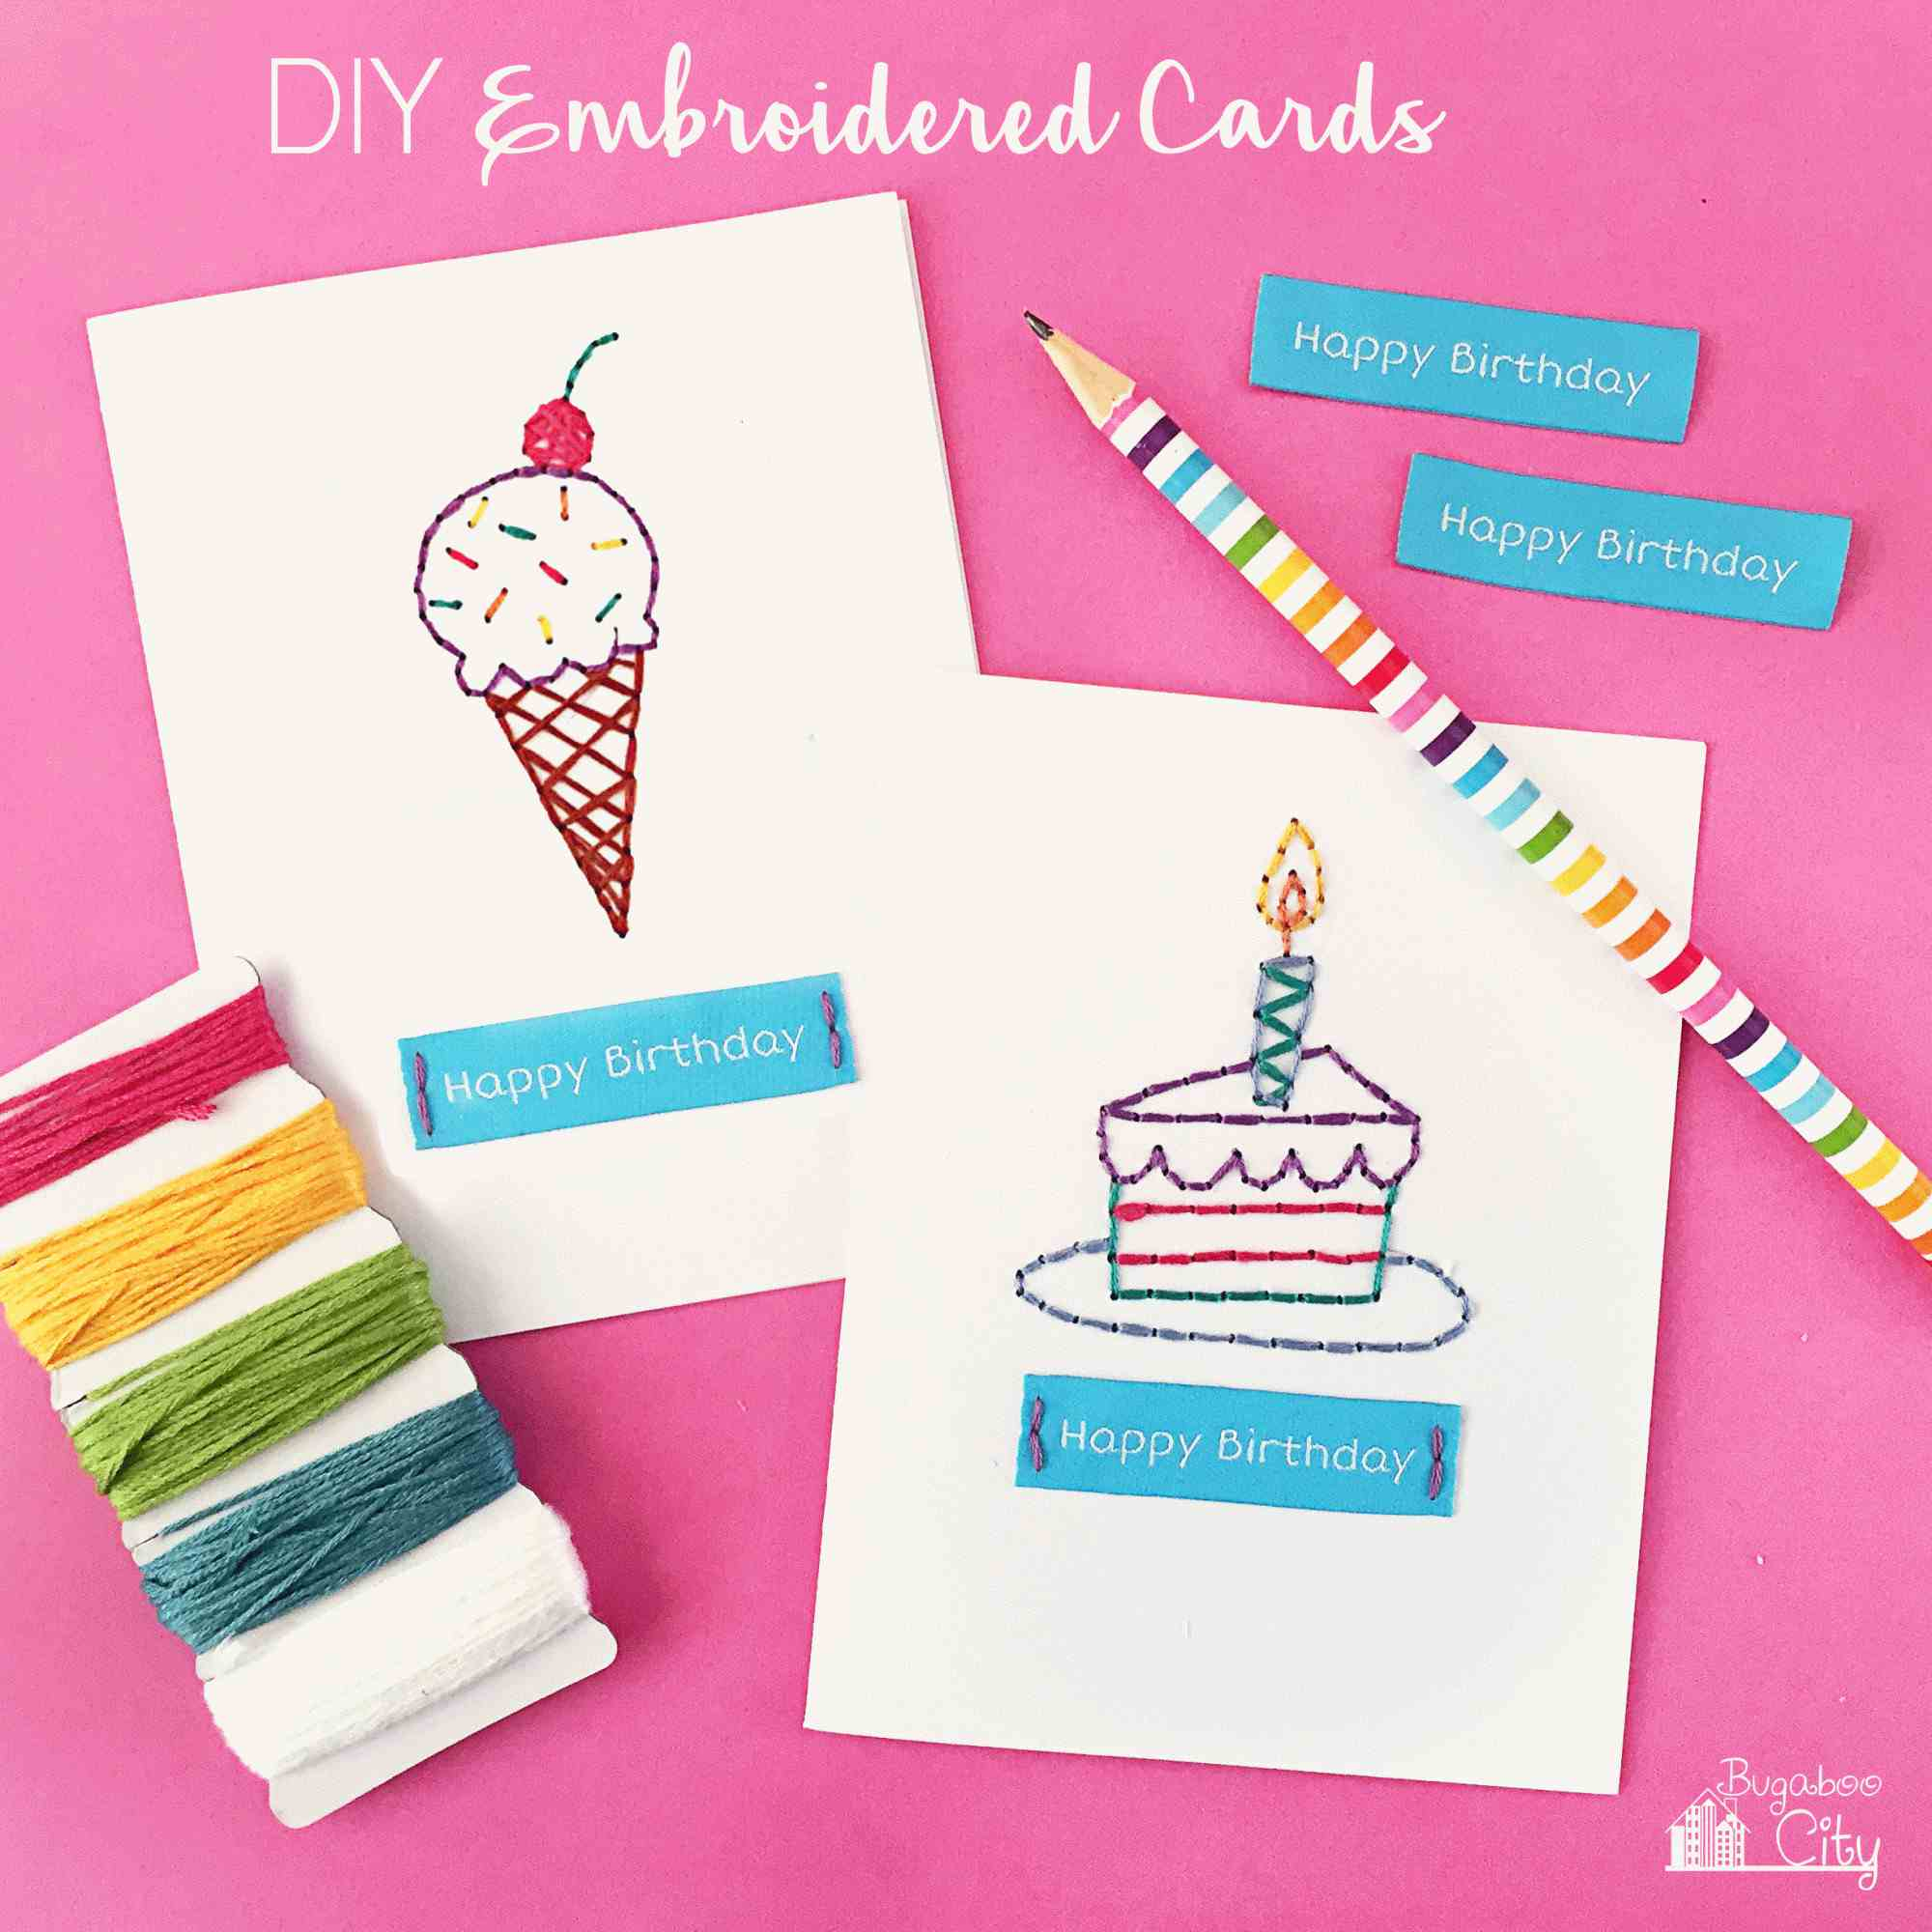 Happy Birthday Homemade Card Ideas Get Inspiration From 25 Of The Best Diy Birthday Cards